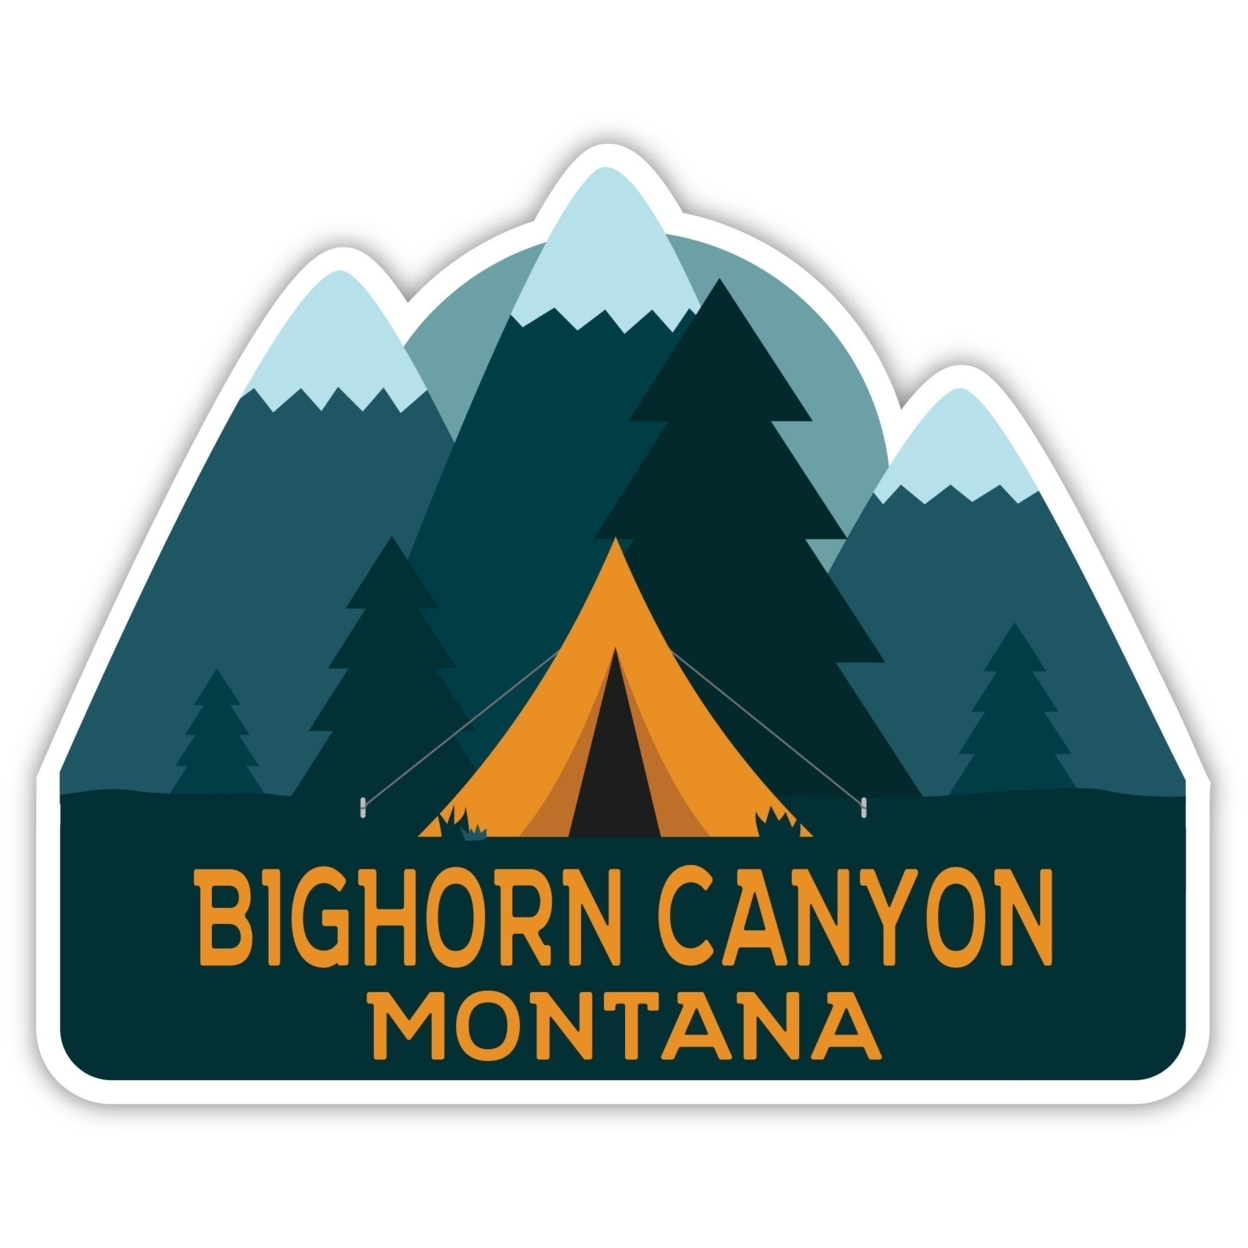 Bighorn Canyon Montana Souvenir Decorative Stickers (Choose Theme And Size) - 4-Pack, 2-Inch, Tent